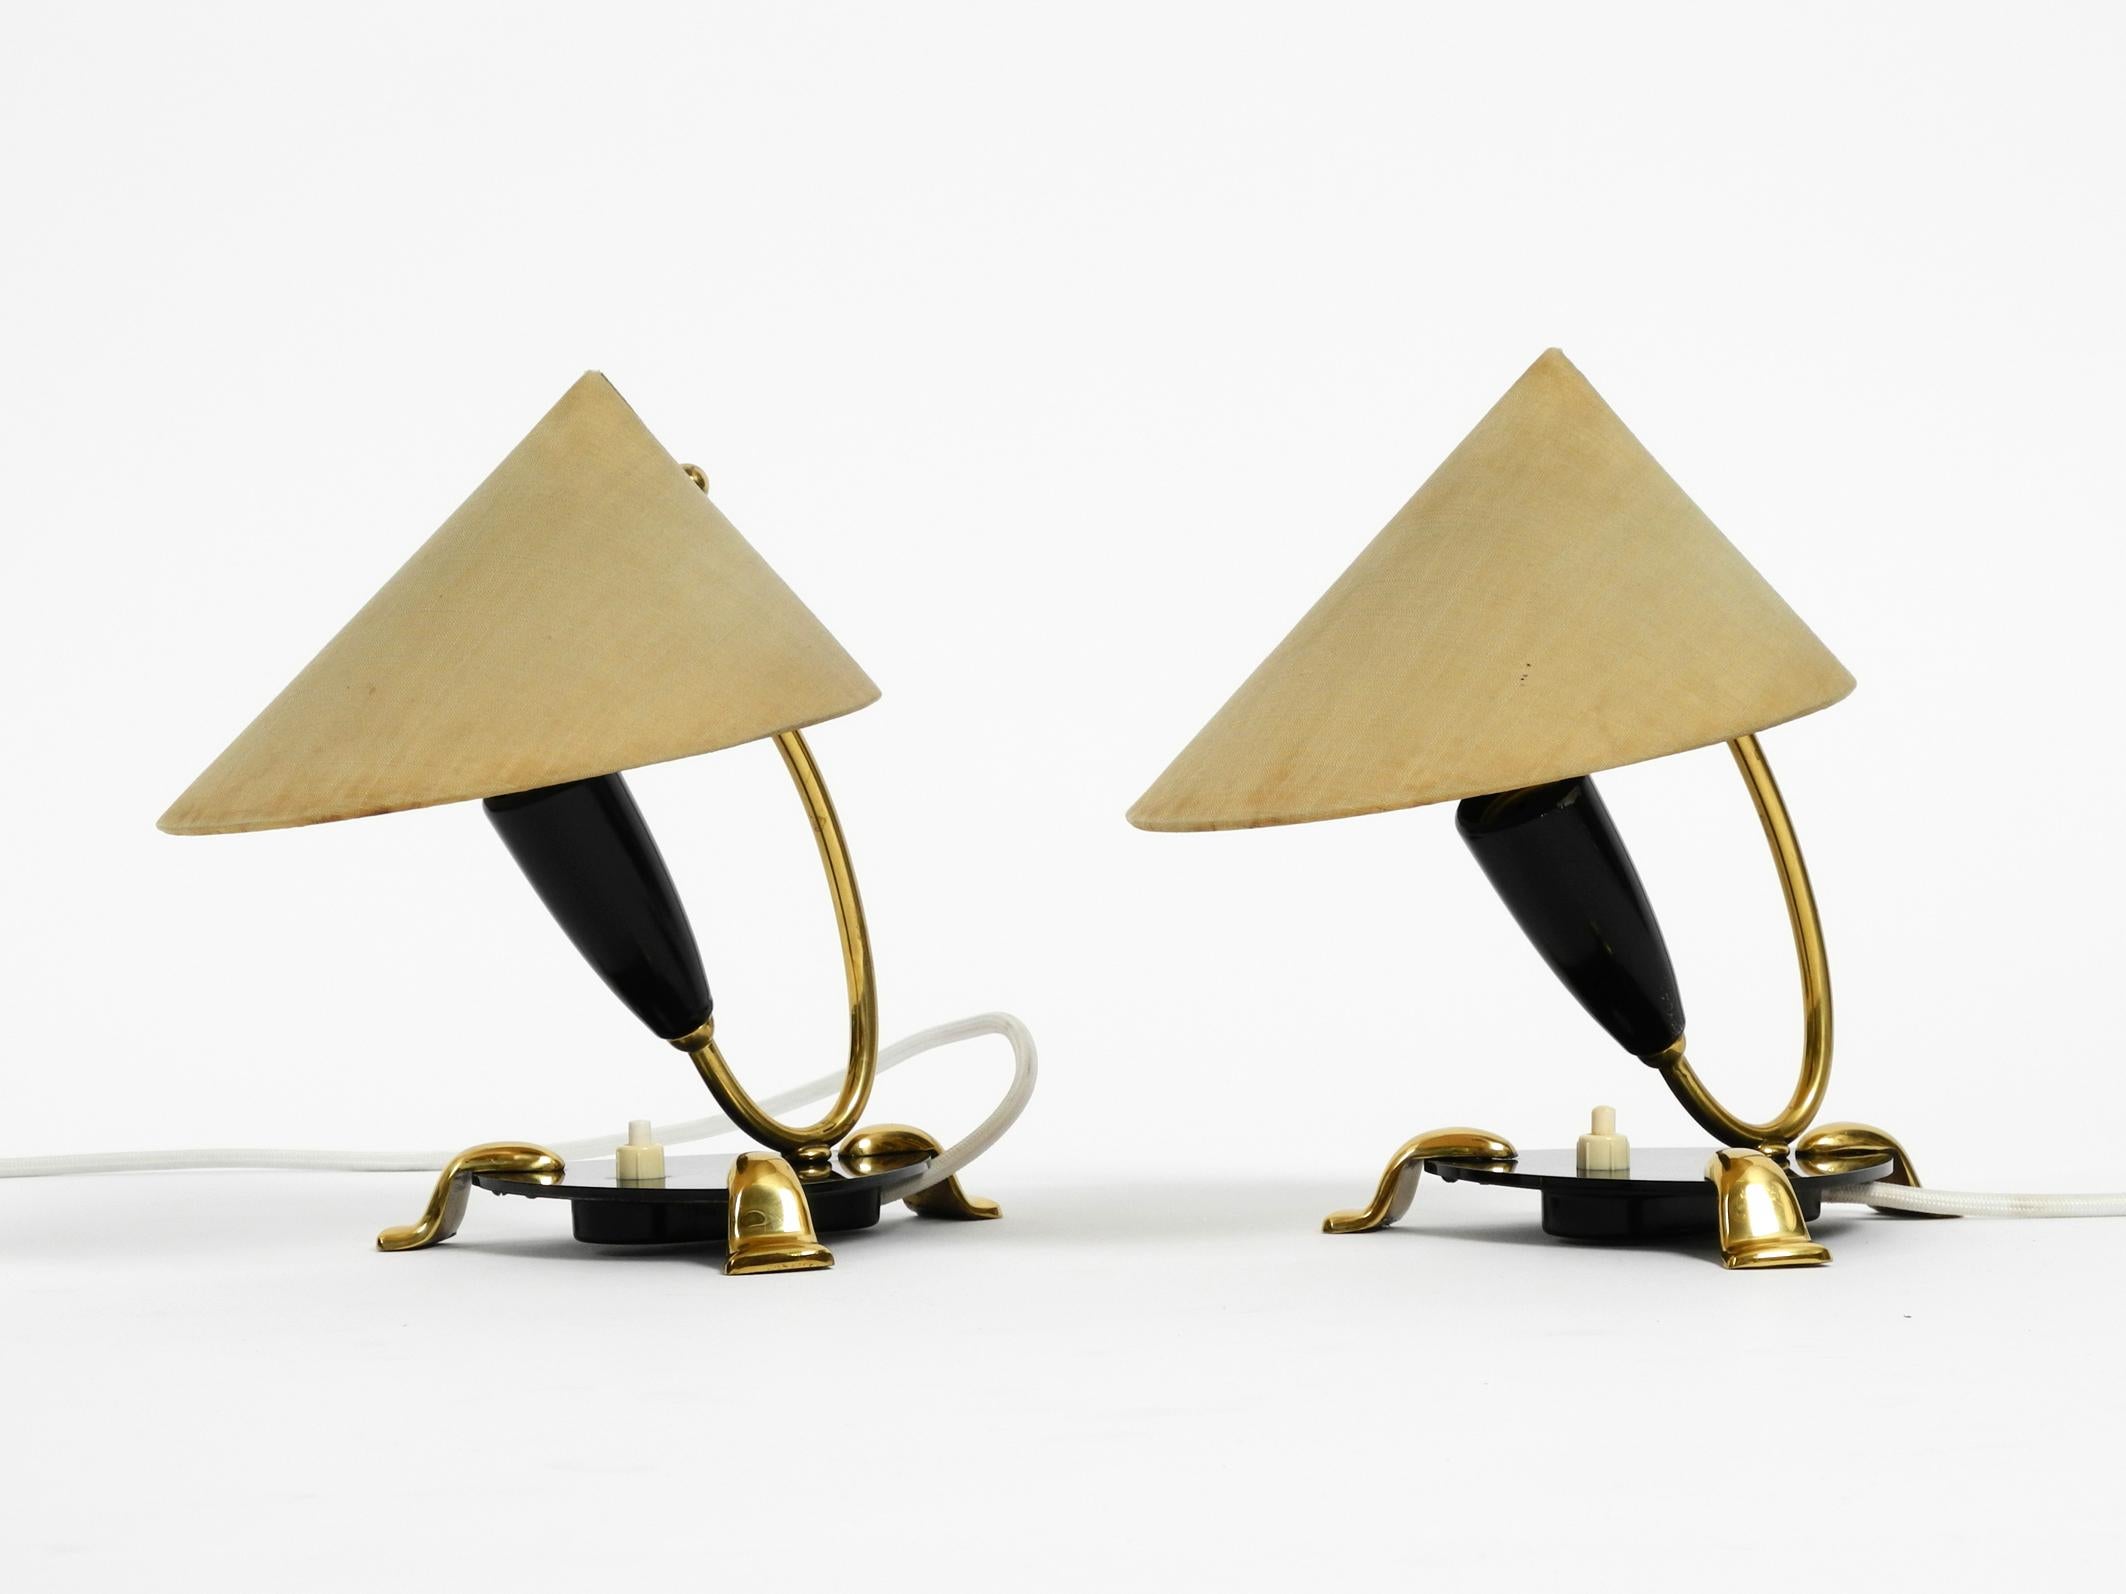 A pair of beautiful, unusual midcentury bedside lamps
made of brass and black plexiglass with fabric lampshades.
Fantastic in this combination of light green, black and brass.
Typical design from that time, in very good vintage condition.
Shade